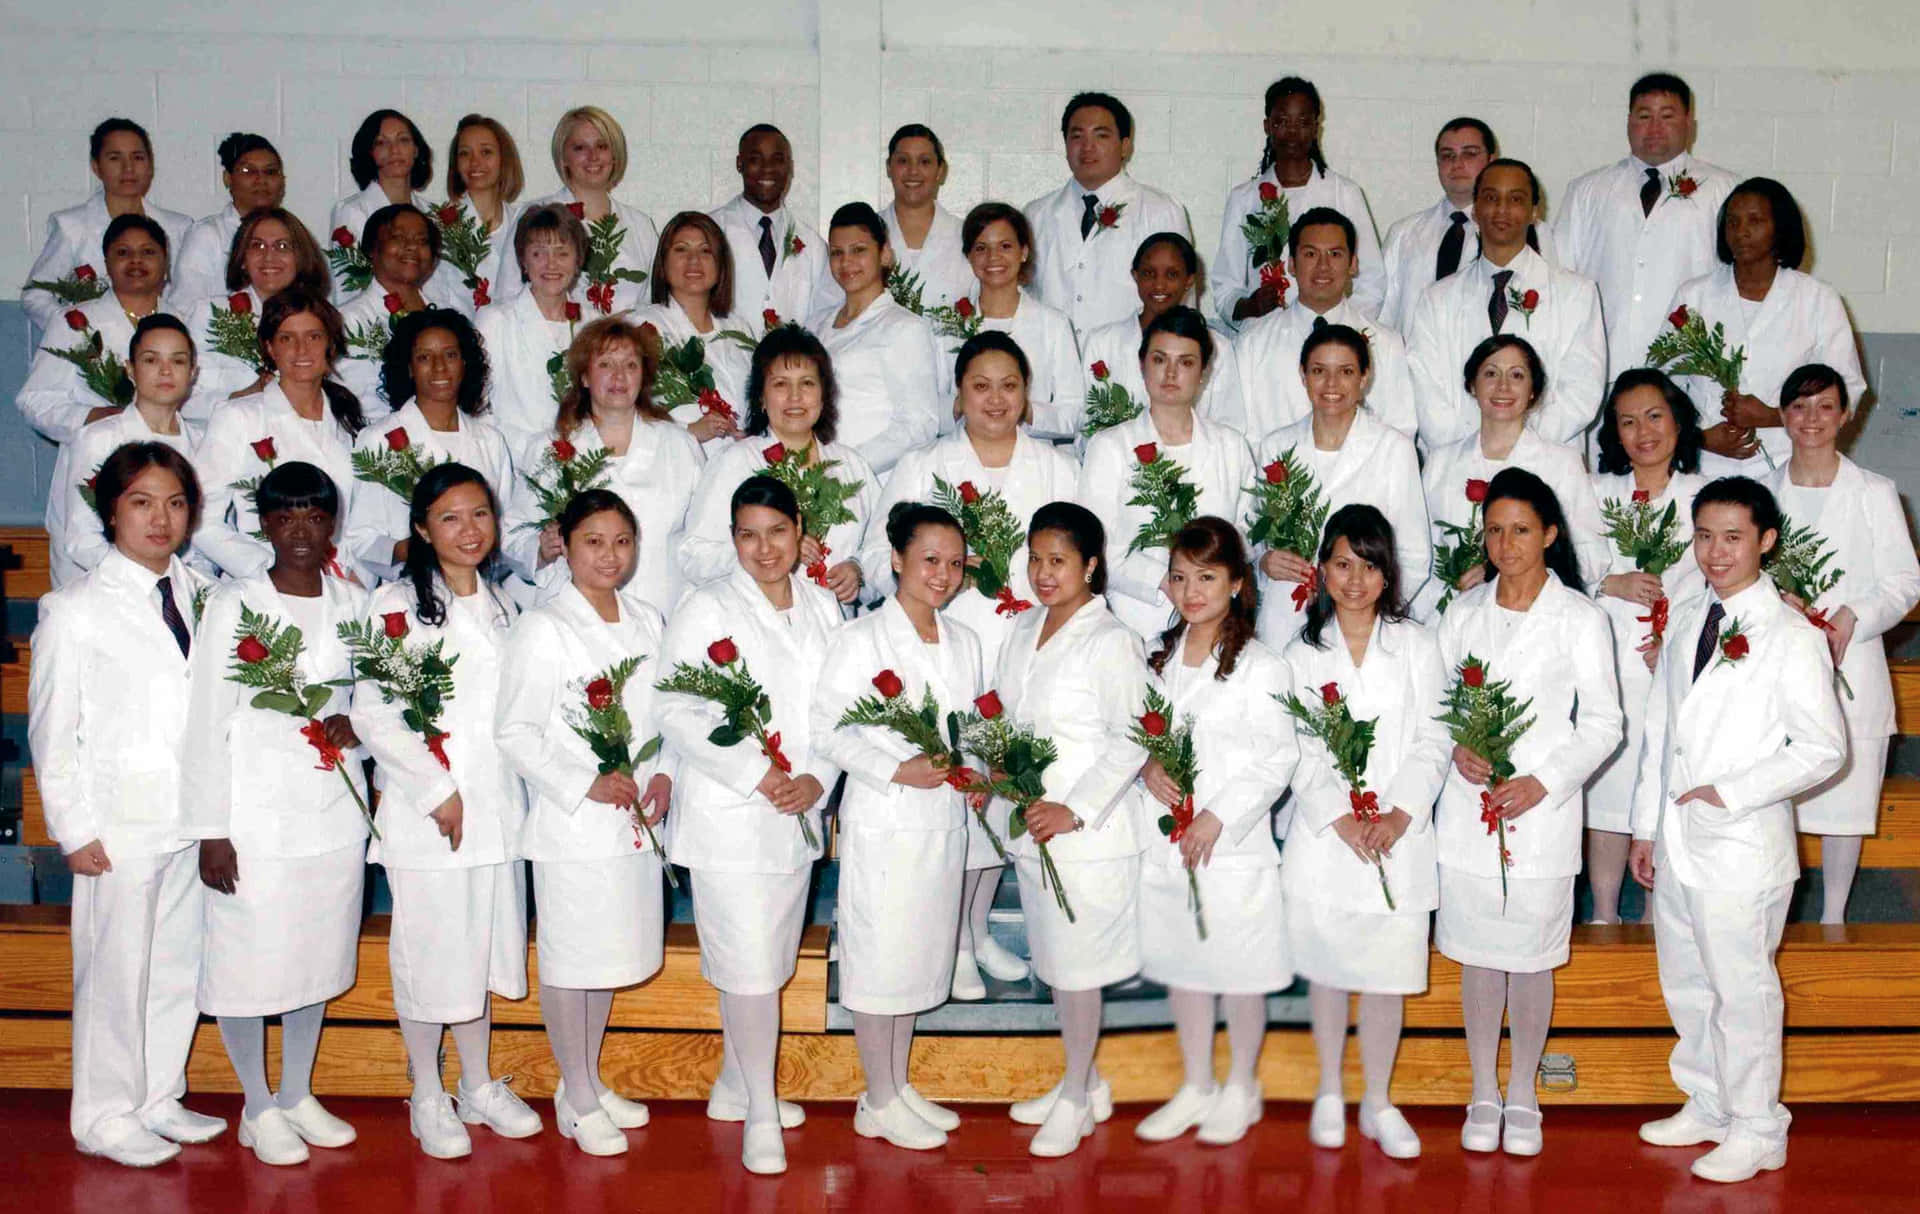 A Group Of Doctors In White Coats Posing For A Picture